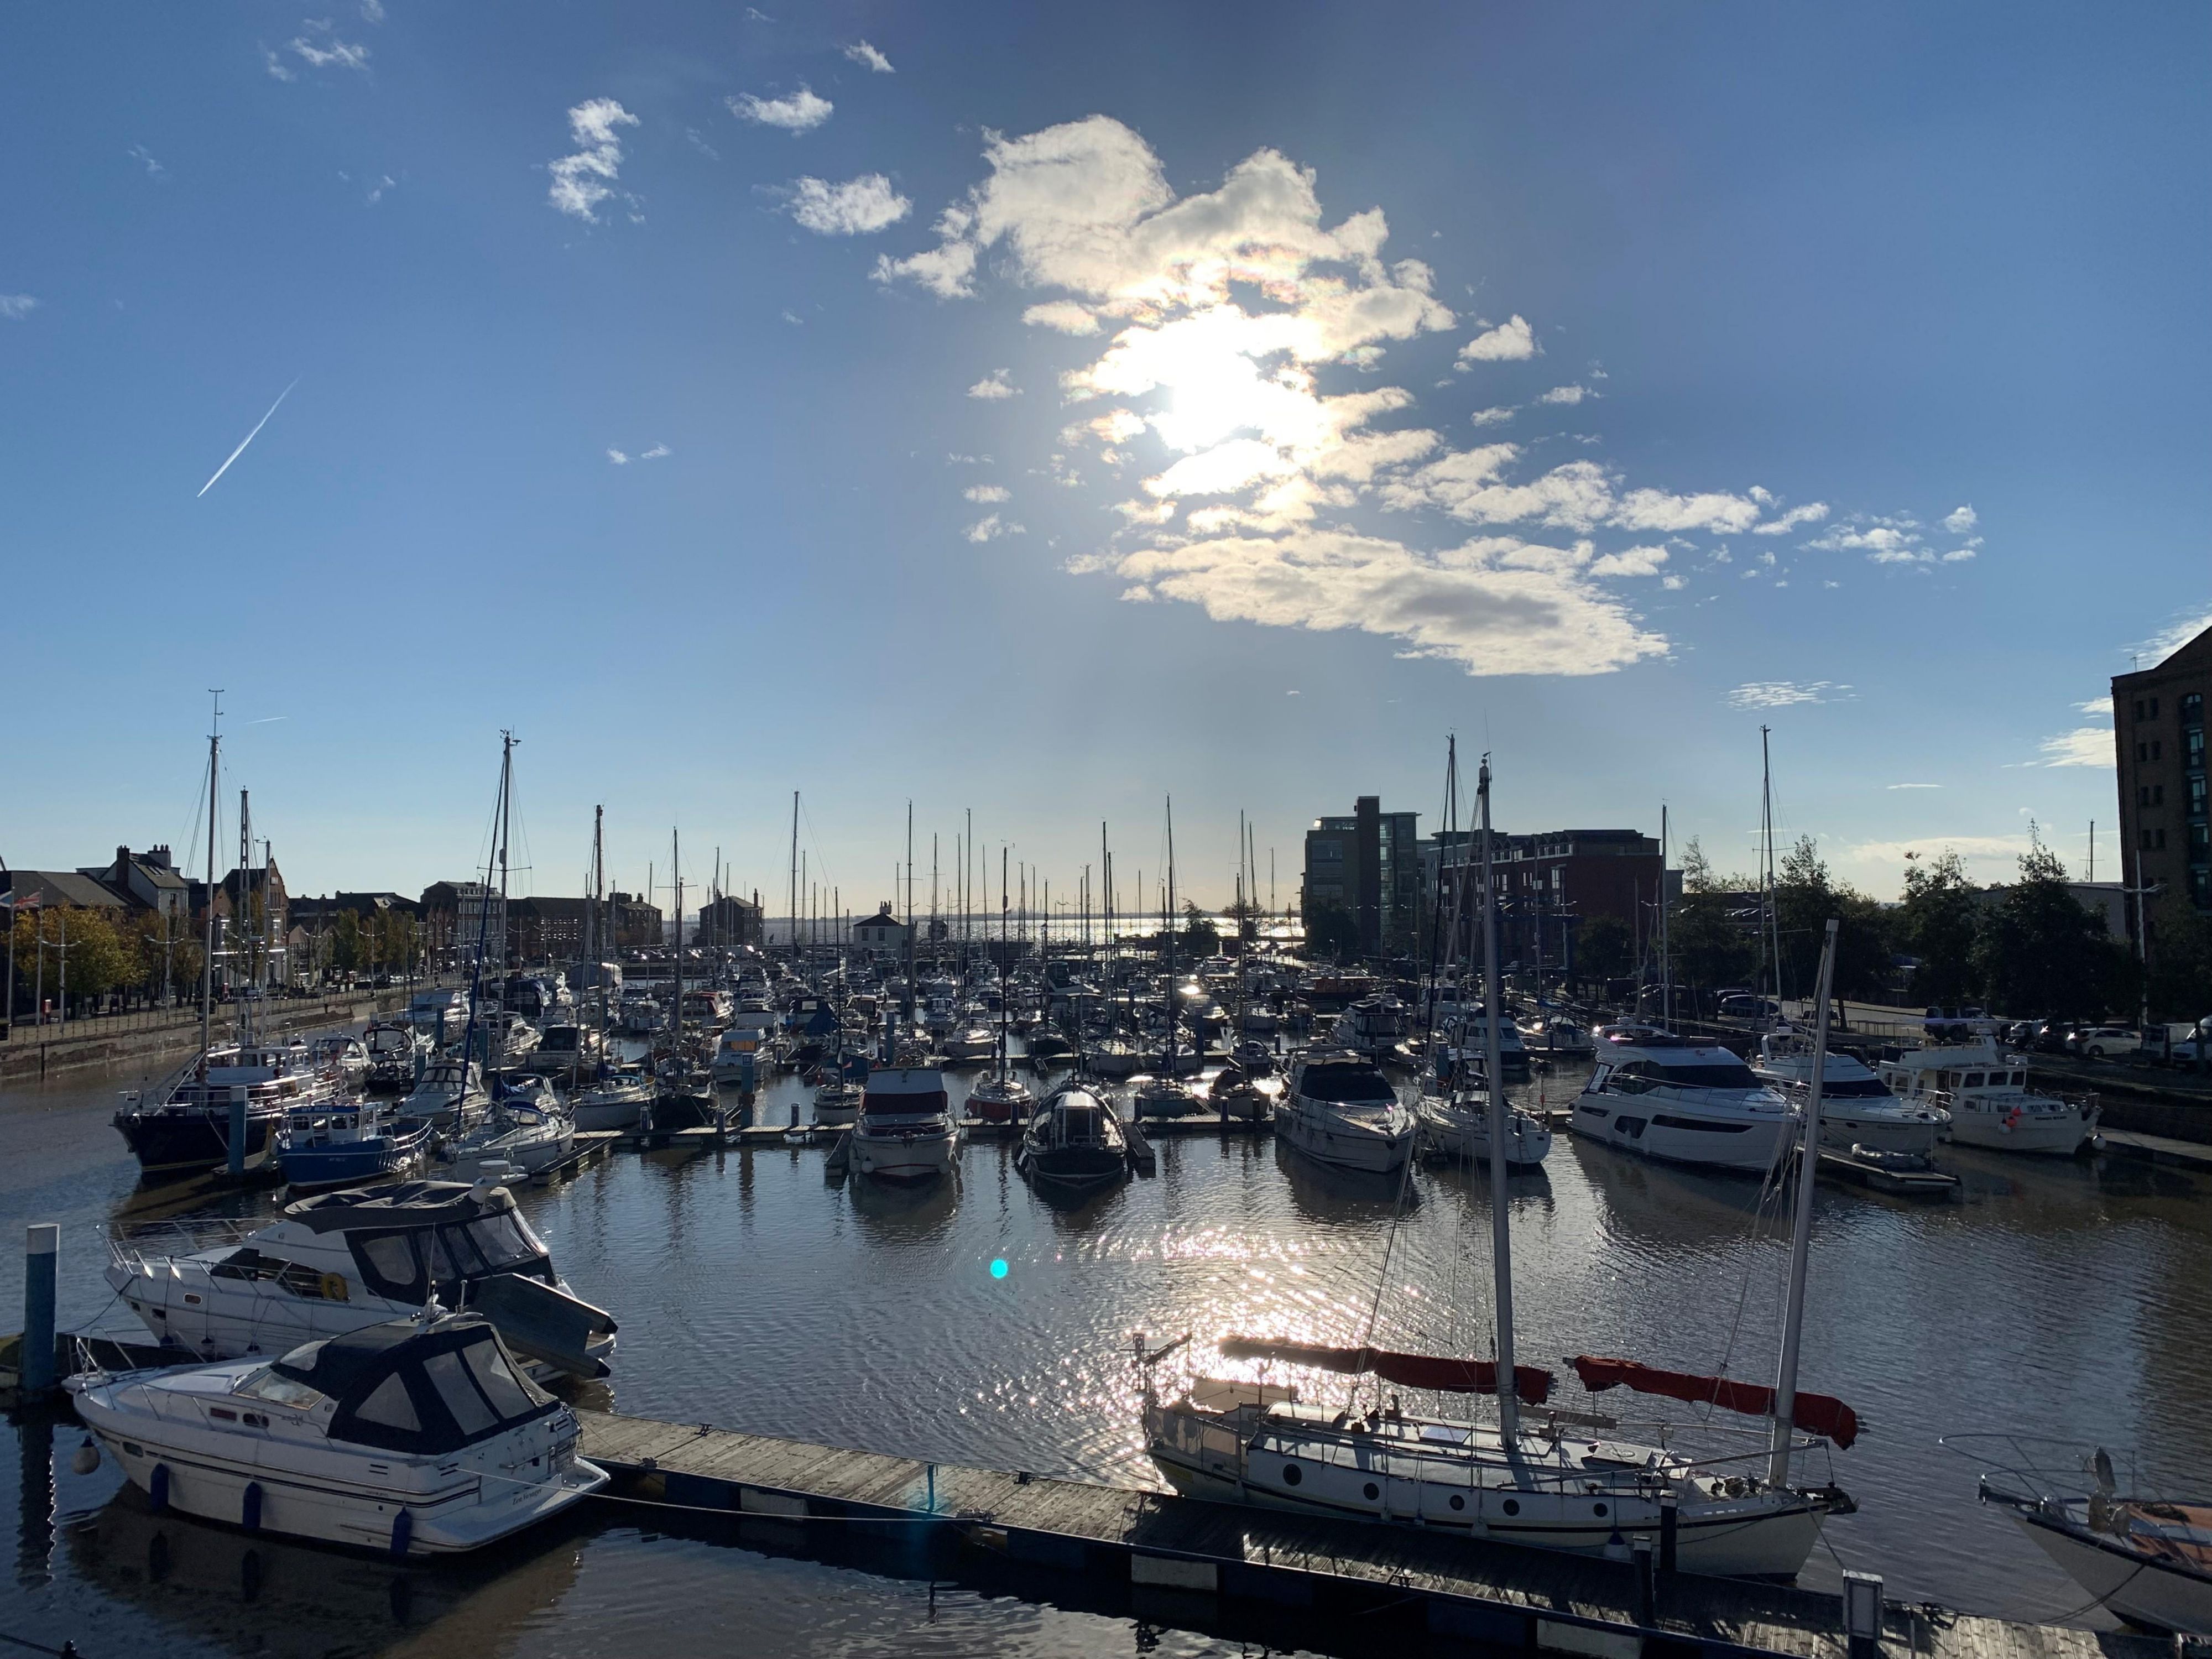 With so much to do on our doorstep, we are perfectly located for your next staycation. Attractions such as Hull Marina, the Humber Bridge, ‘The Deep’ Aquarium and Hull Museums Quarter are all located near our hotel, perfect for your next family getaway!